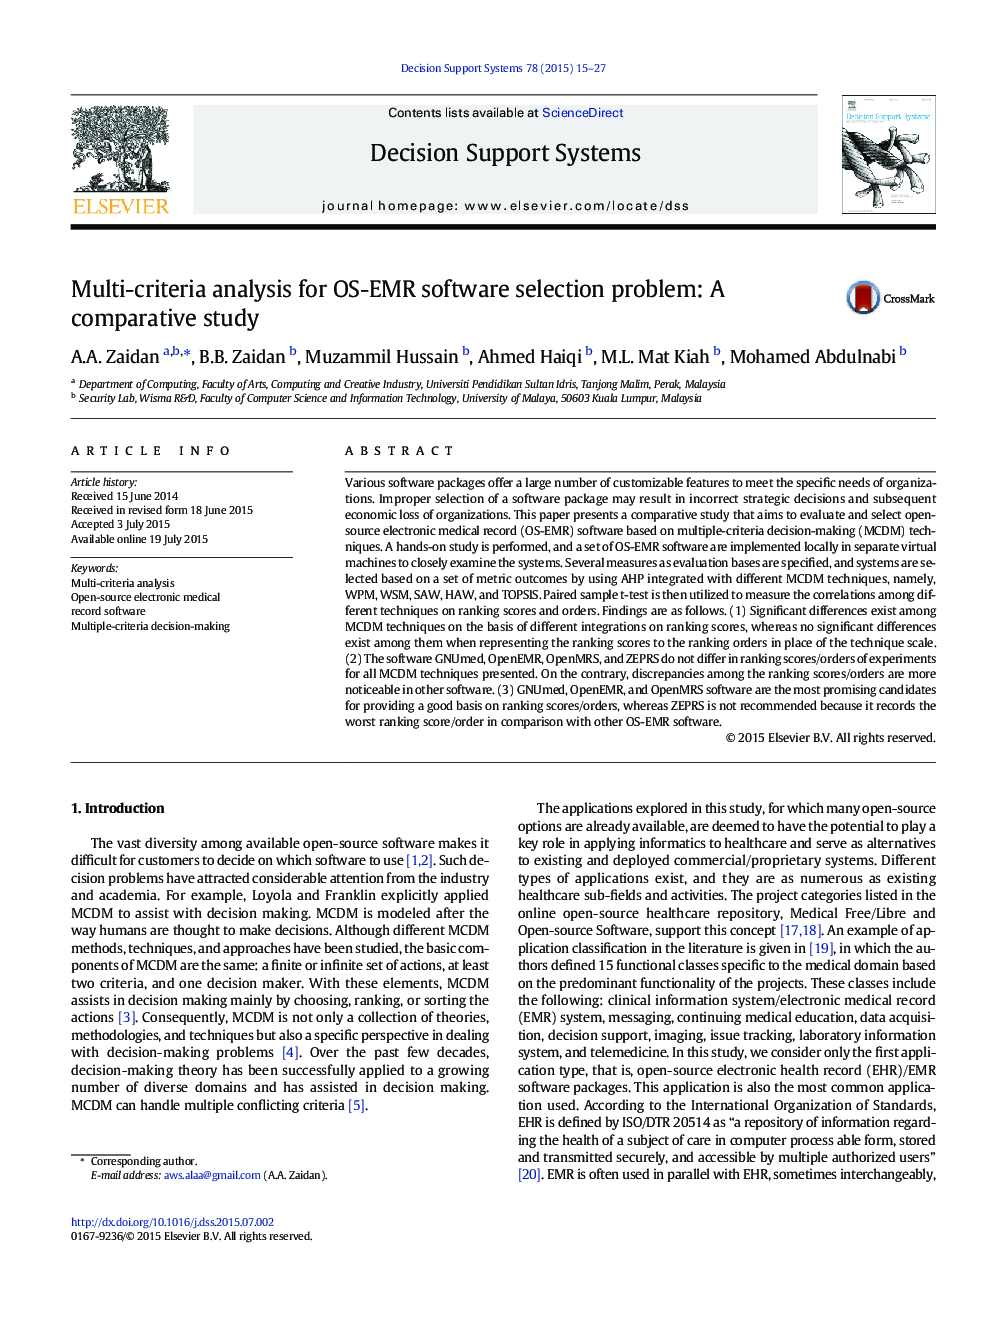 Multi-criteria analysis for OS-EMR software selection problem: A comparative study